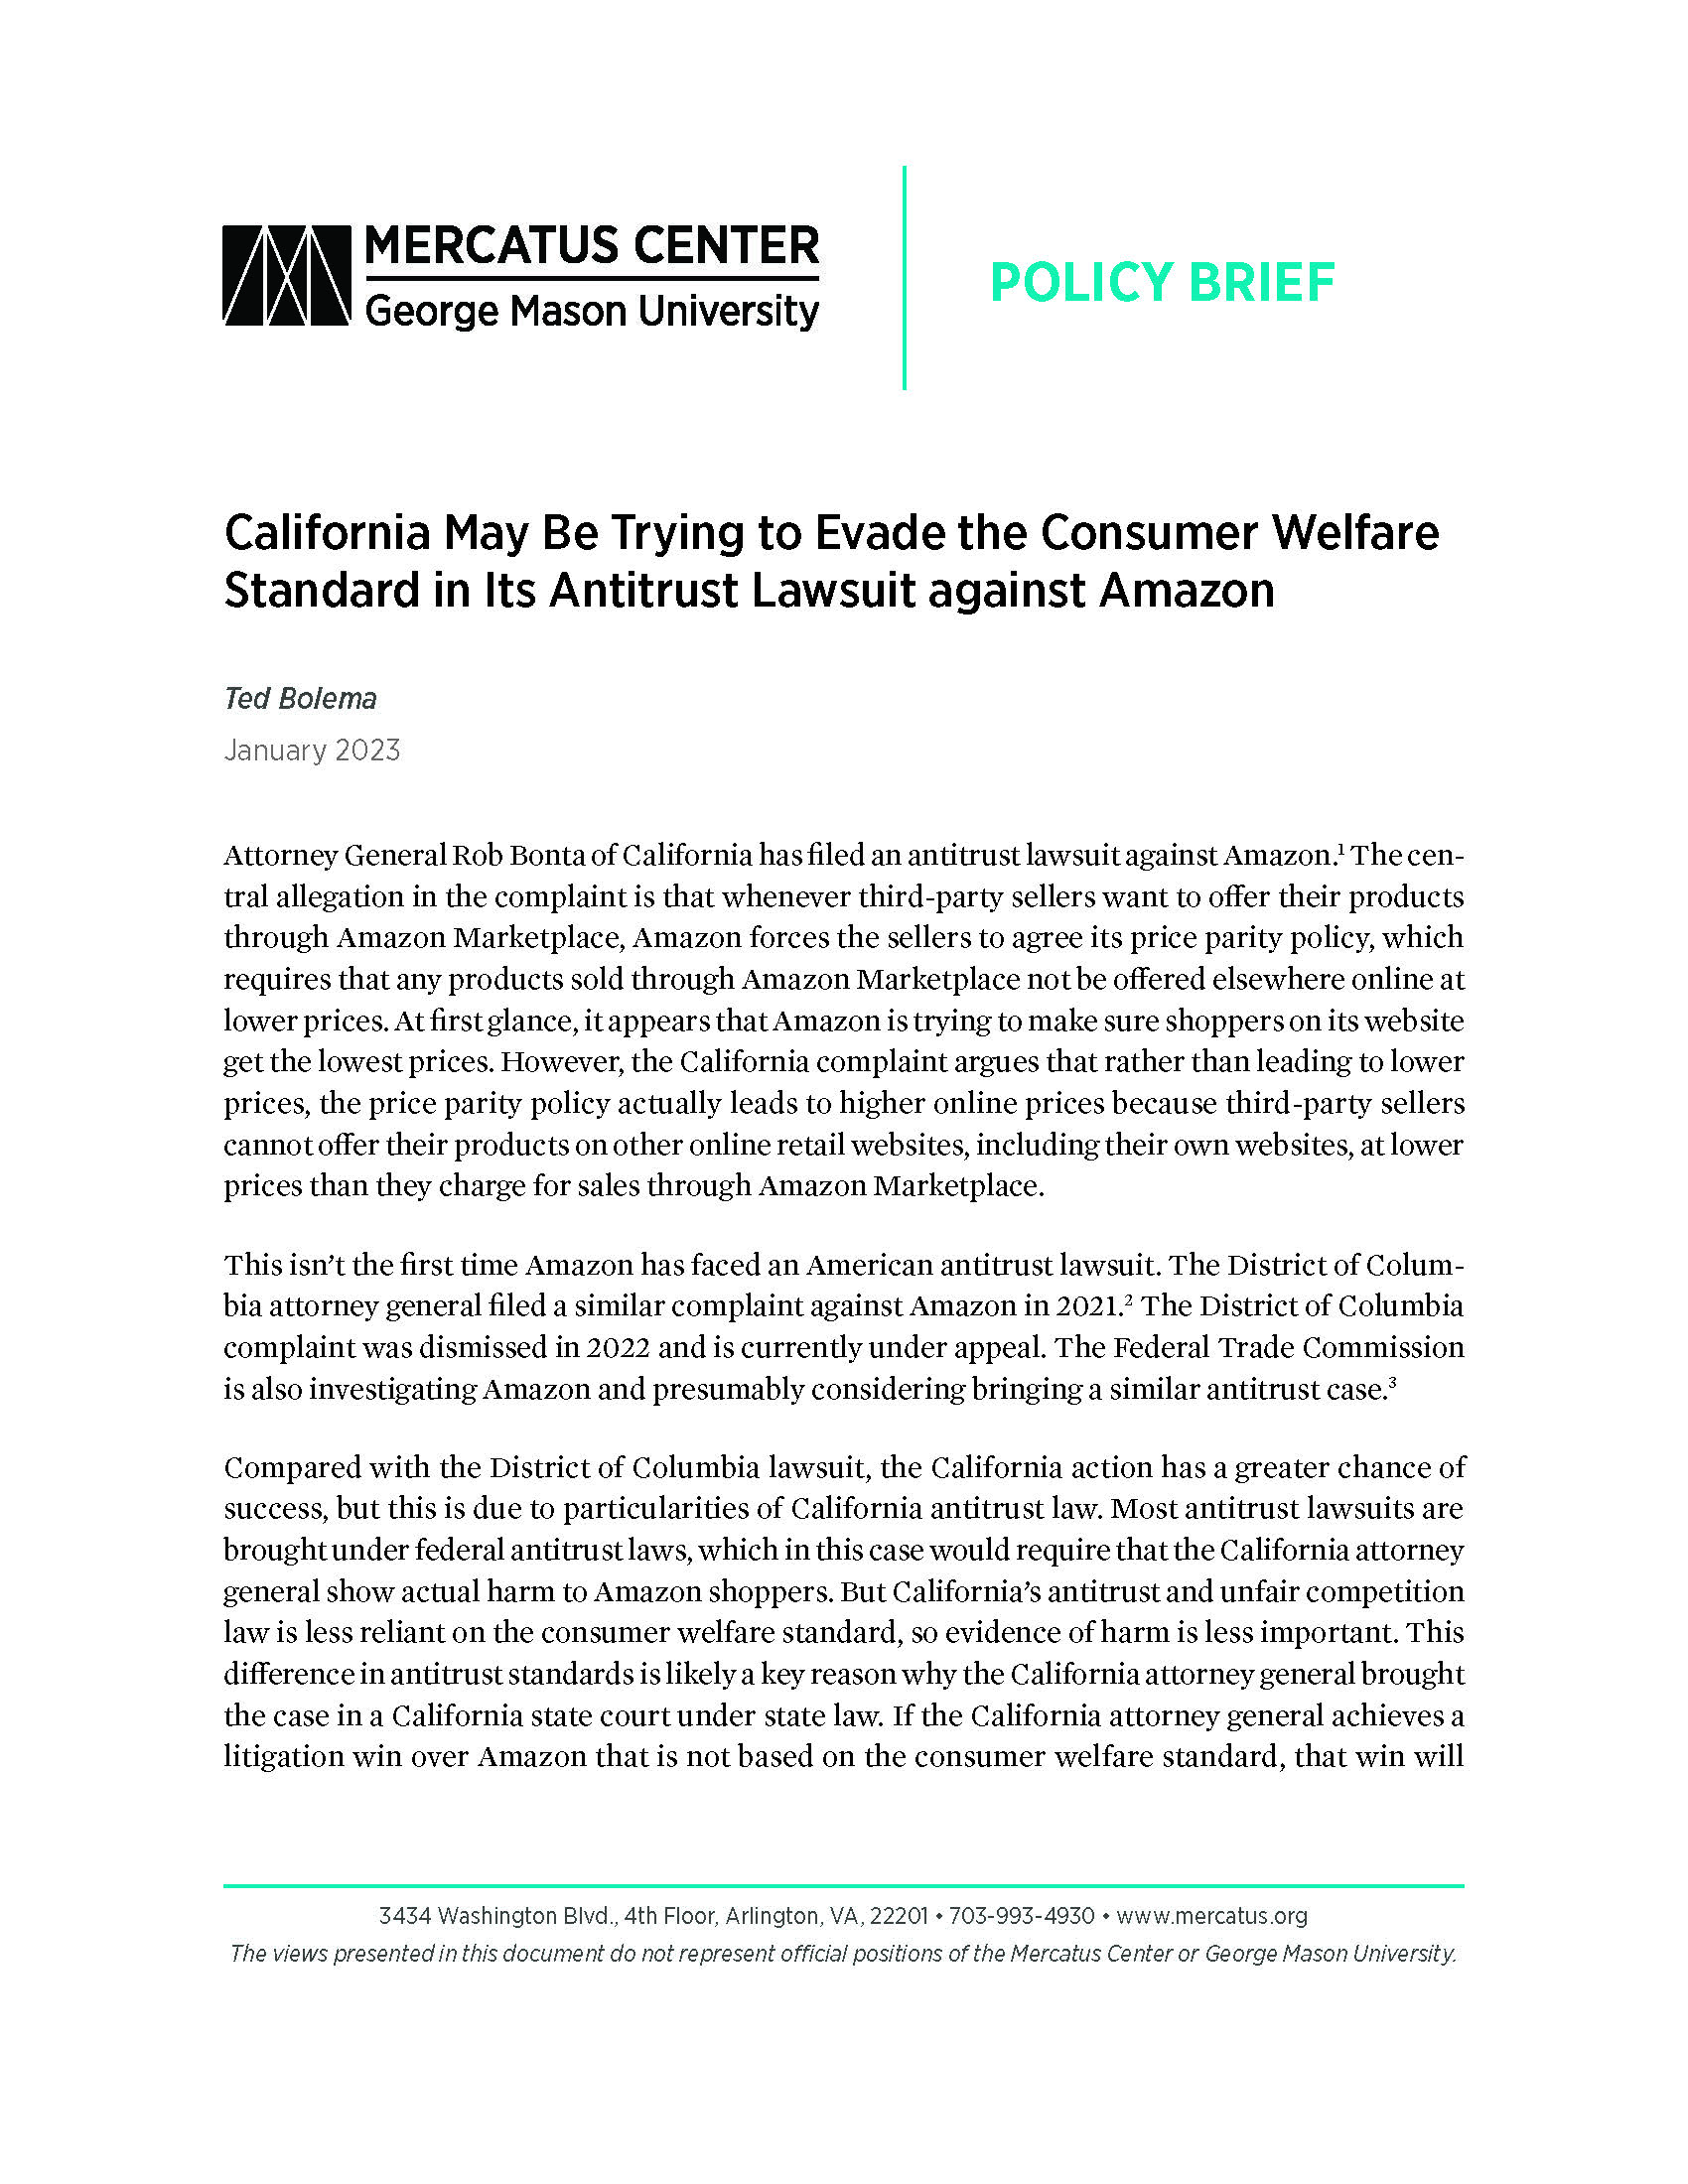 Bolema - Policy Brief - California May Be Trying to Evade the Consumer Welfare Standard_Page_01